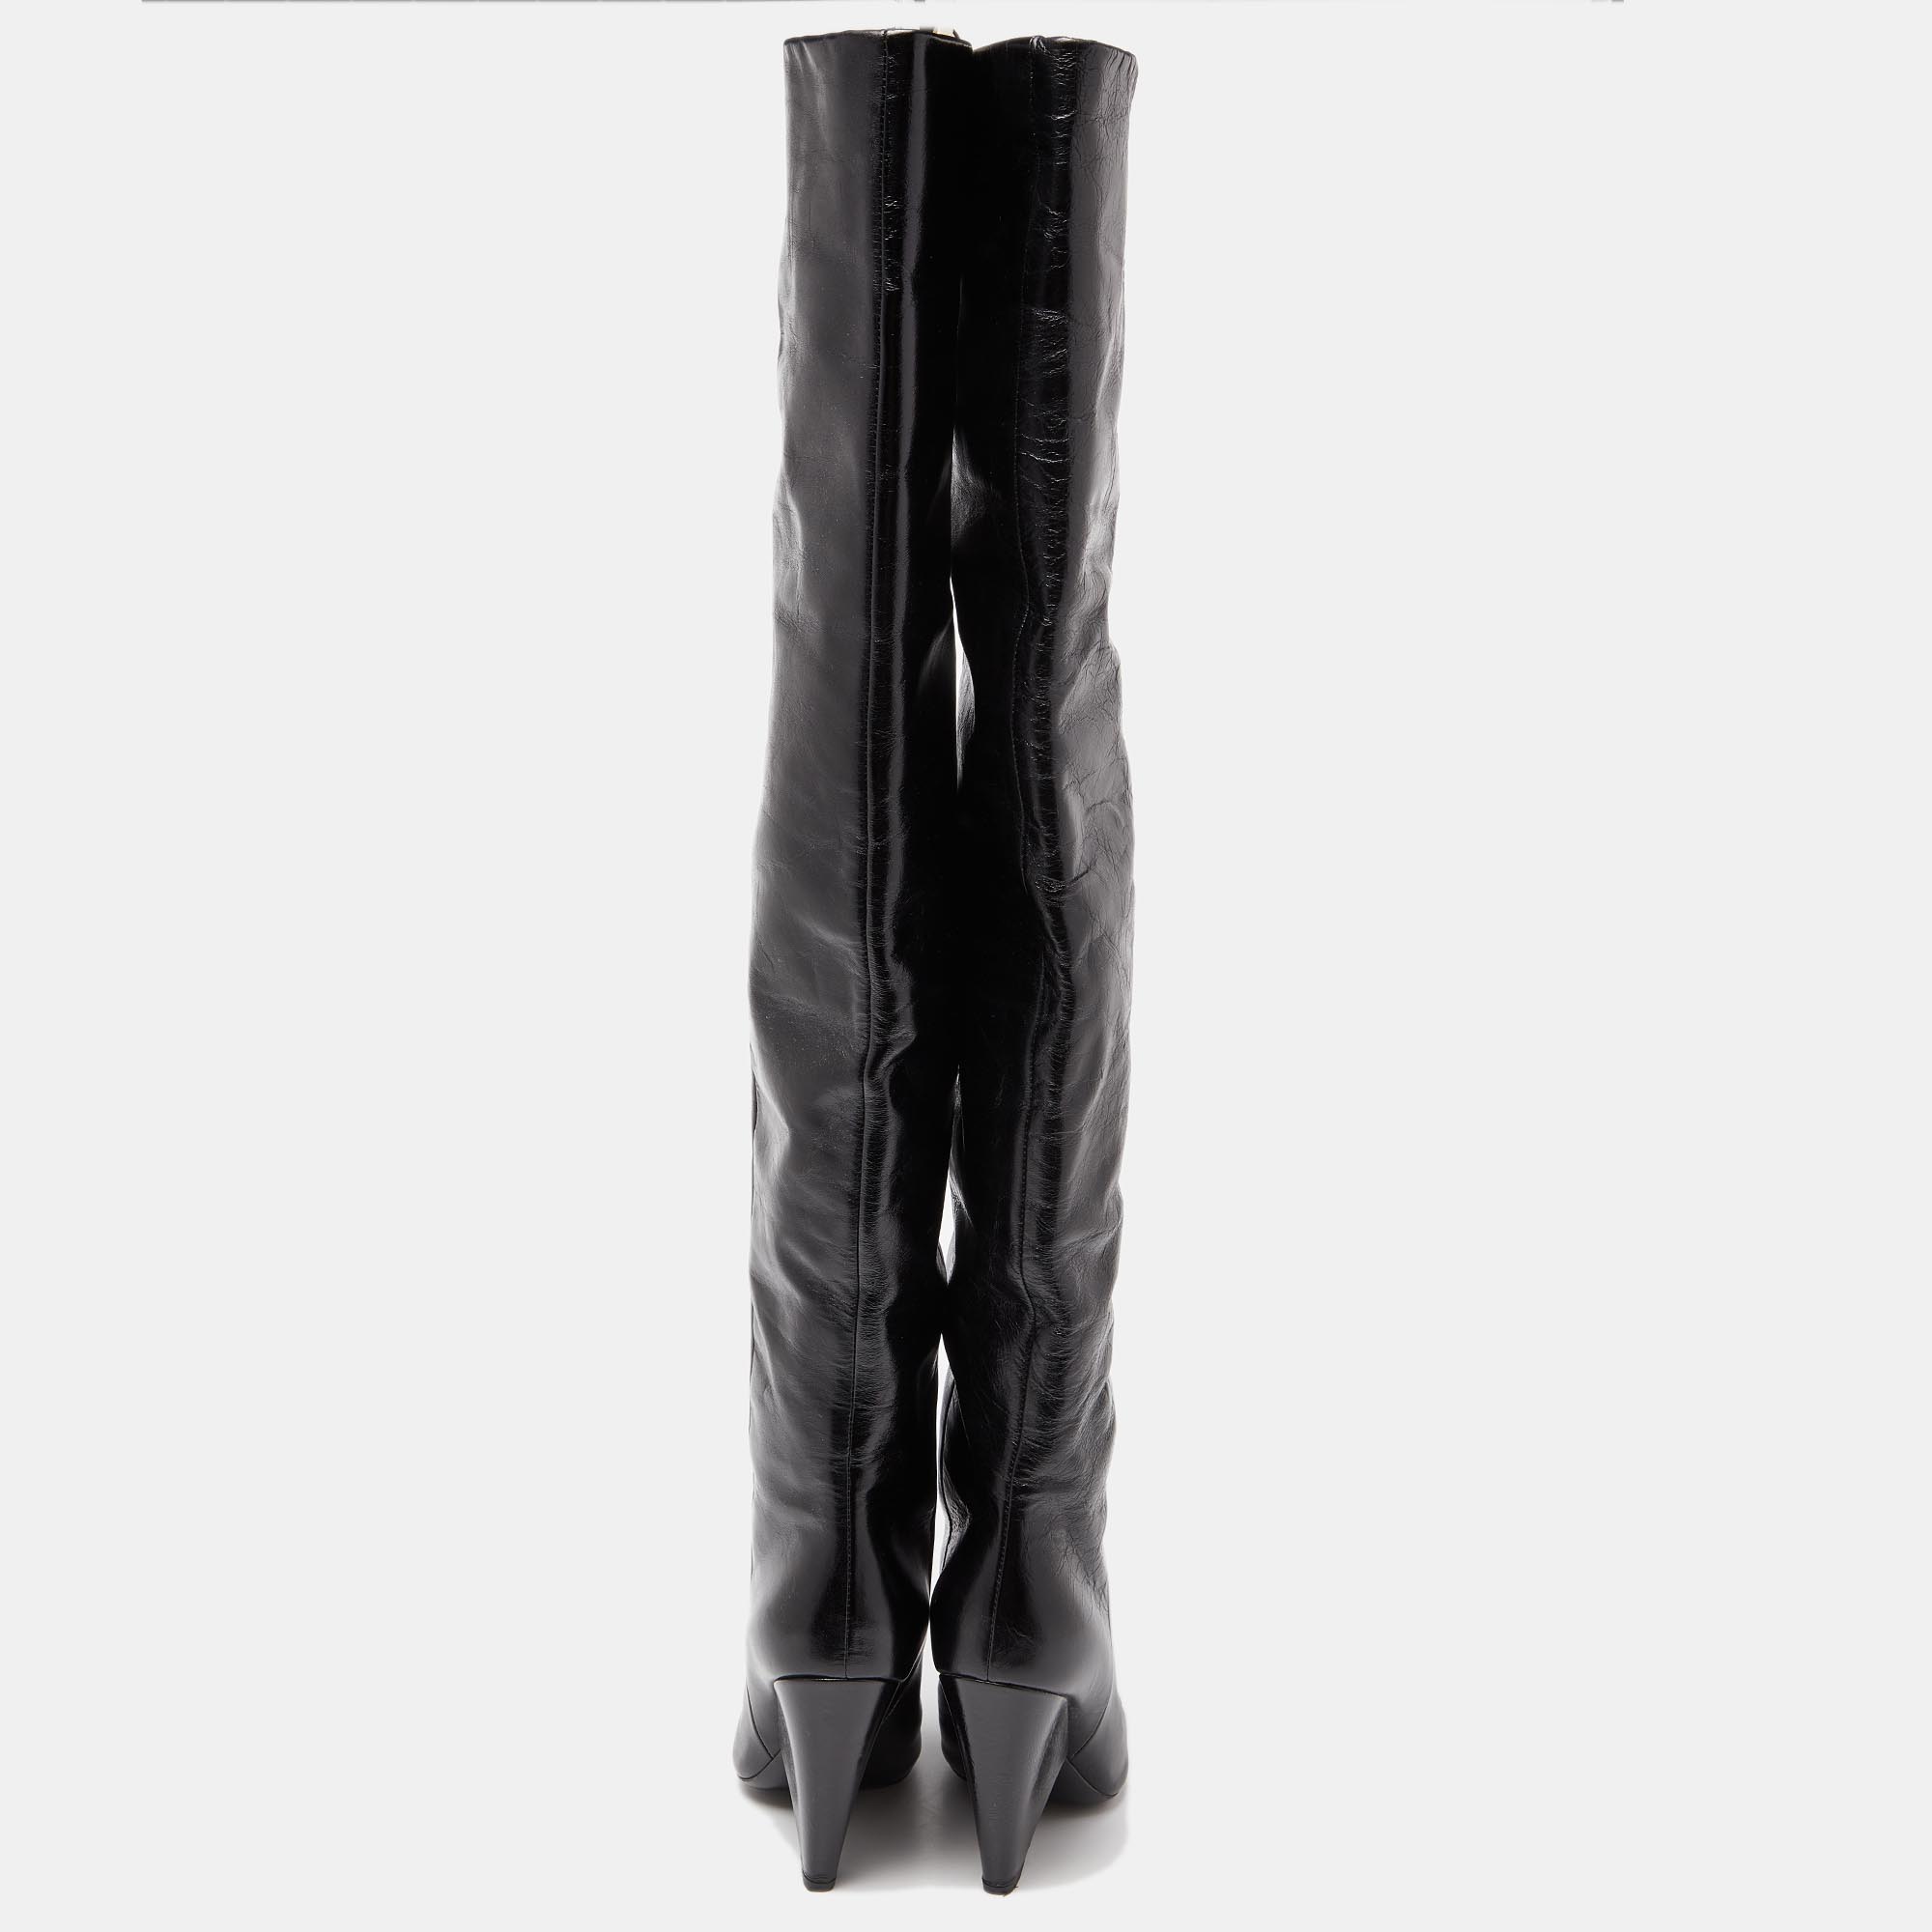 Saint Laurent Black Patent Leather Niki Over The Knee Boots Size 38